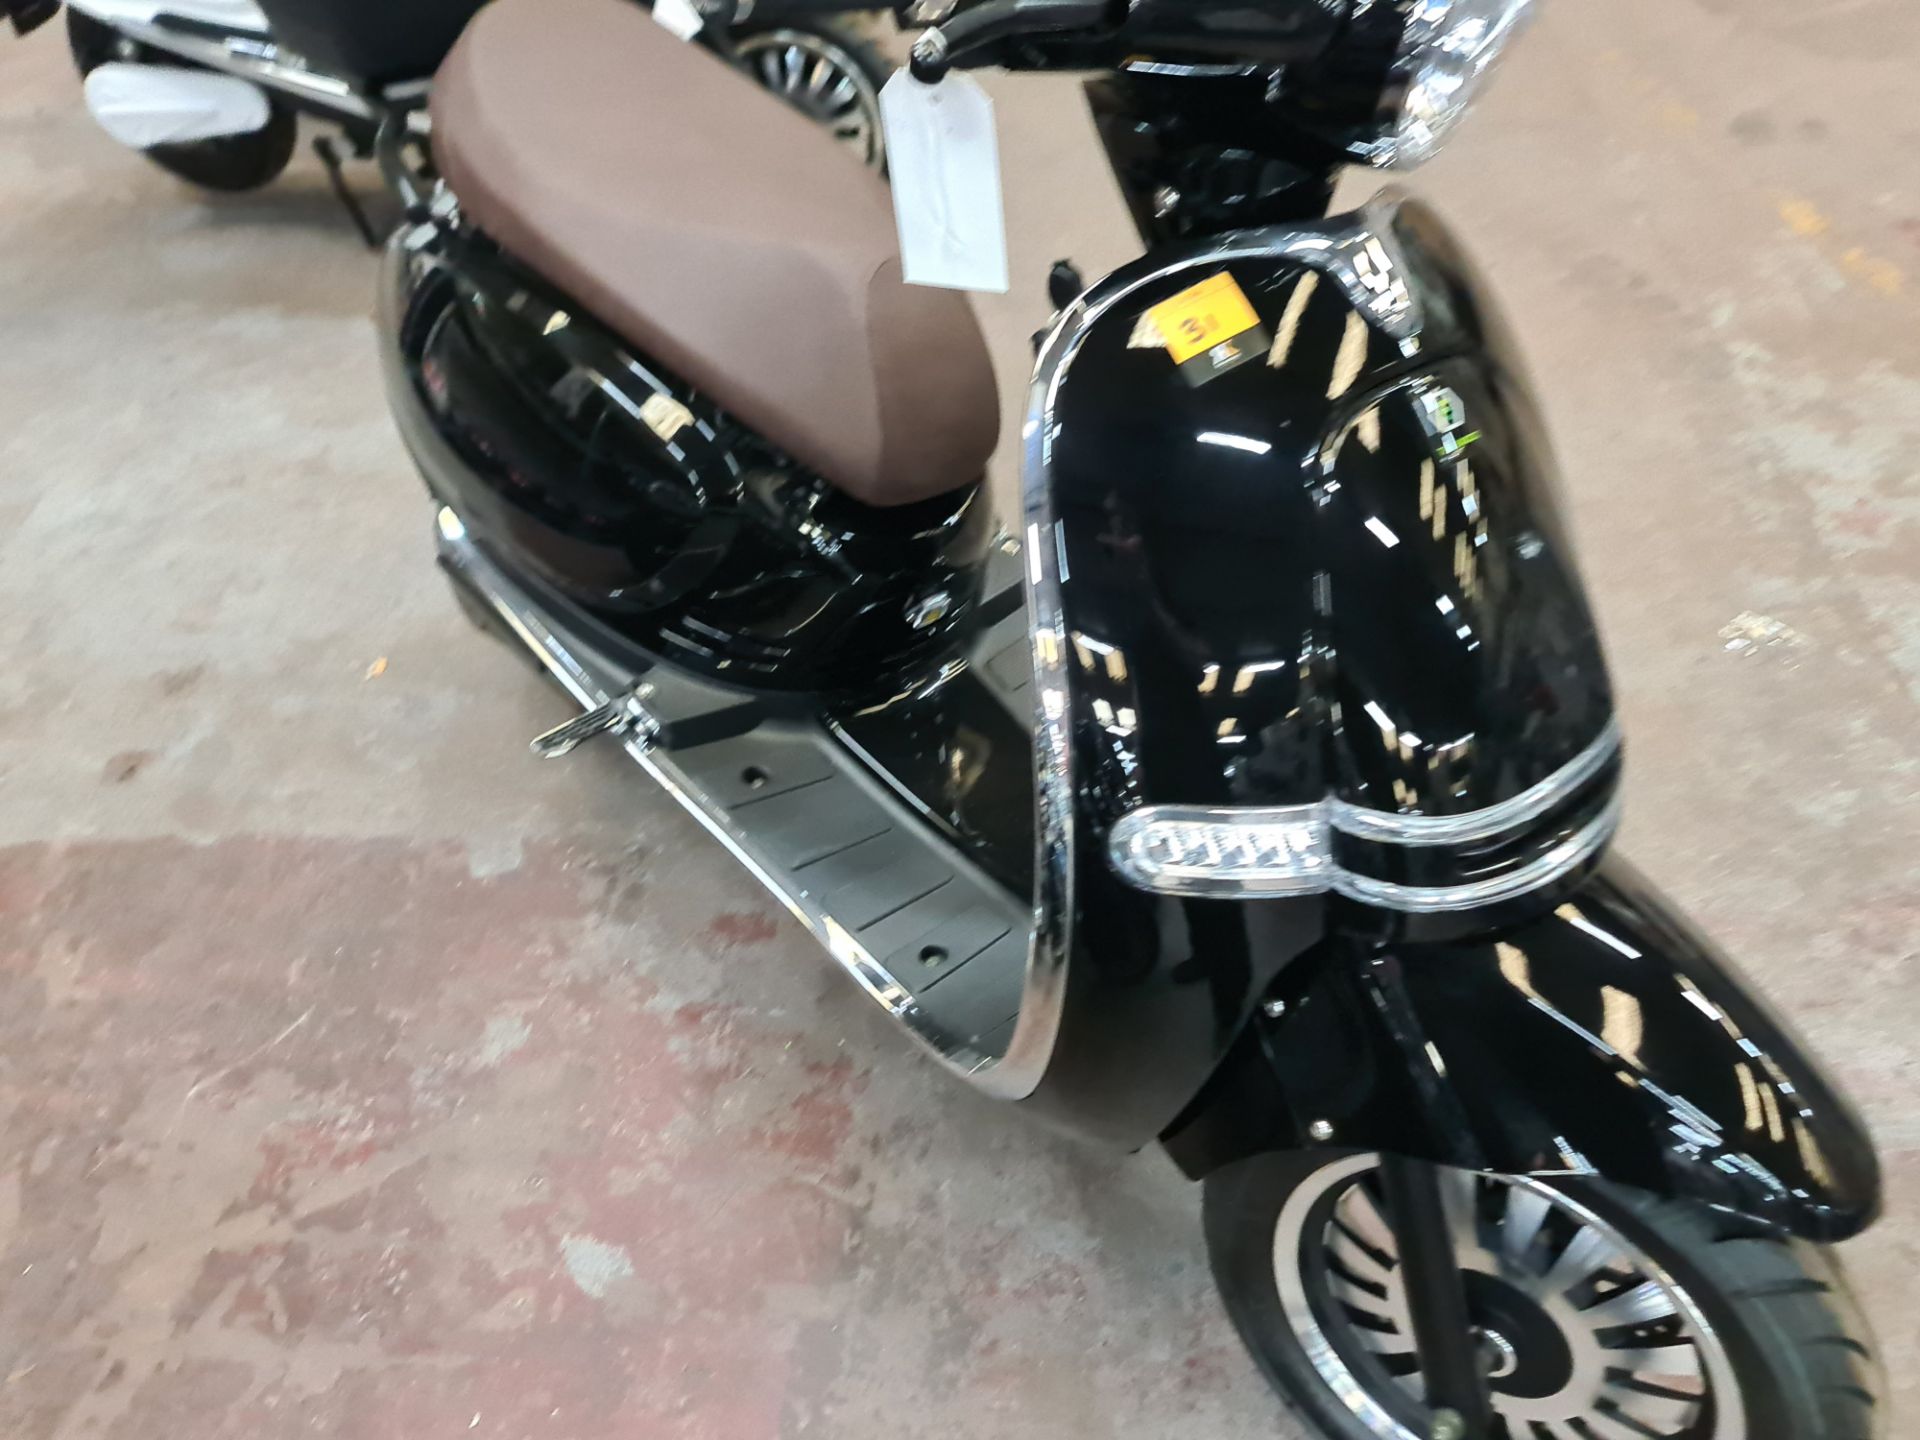 LO23 YVH Ultra 4000 electric scooter, colour: black, 125cc equivalent, 50mph top speed, 50 mile rang - Image 8 of 25